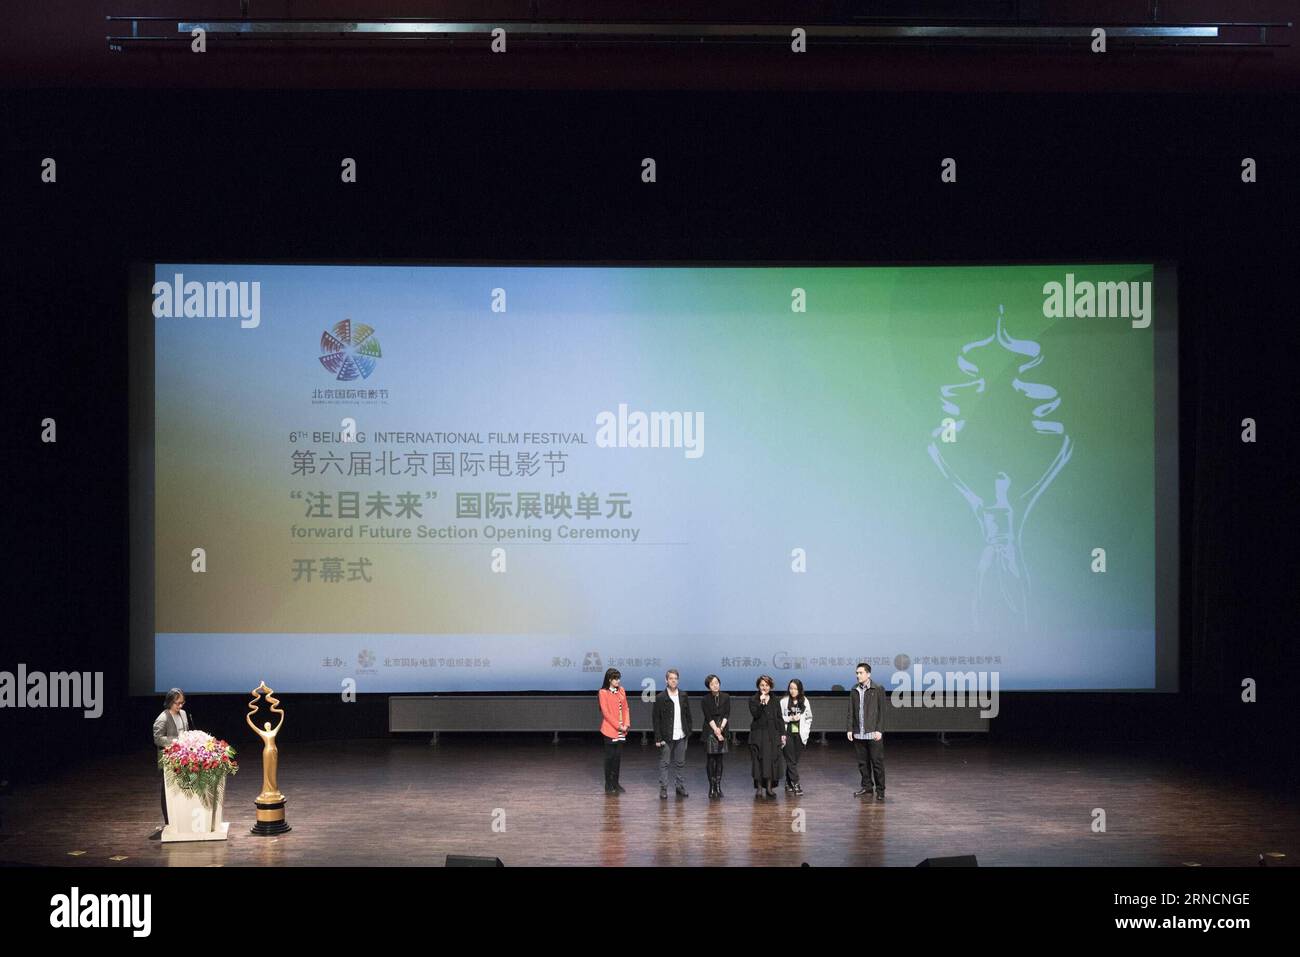 (160417) -- BEIJING, April 17, 2016 -- Directors introduce their films at the opening ceremony of the forward future section in the 6th Beijing International Film Festival (BJIFF) in Beijing Film Academy in Beijing, capital of China, April 17, 2016. ) (mp) CHINA-BEIJING-FILM FESTIVAL-FORWARD FUTURE SECTION (CN) ChenxYichen PUBLICATIONxNOTxINxCHN   160417 Beijing April 17 2016 Directors introduce their Films AT The Opening Ceremony of The FORWARD Future Section in The 6th Beijing International Film Festival BJIFF in Beijing Film Academy in Beijing Capital of China April 17 2016 MP China Beijing Stock Photo